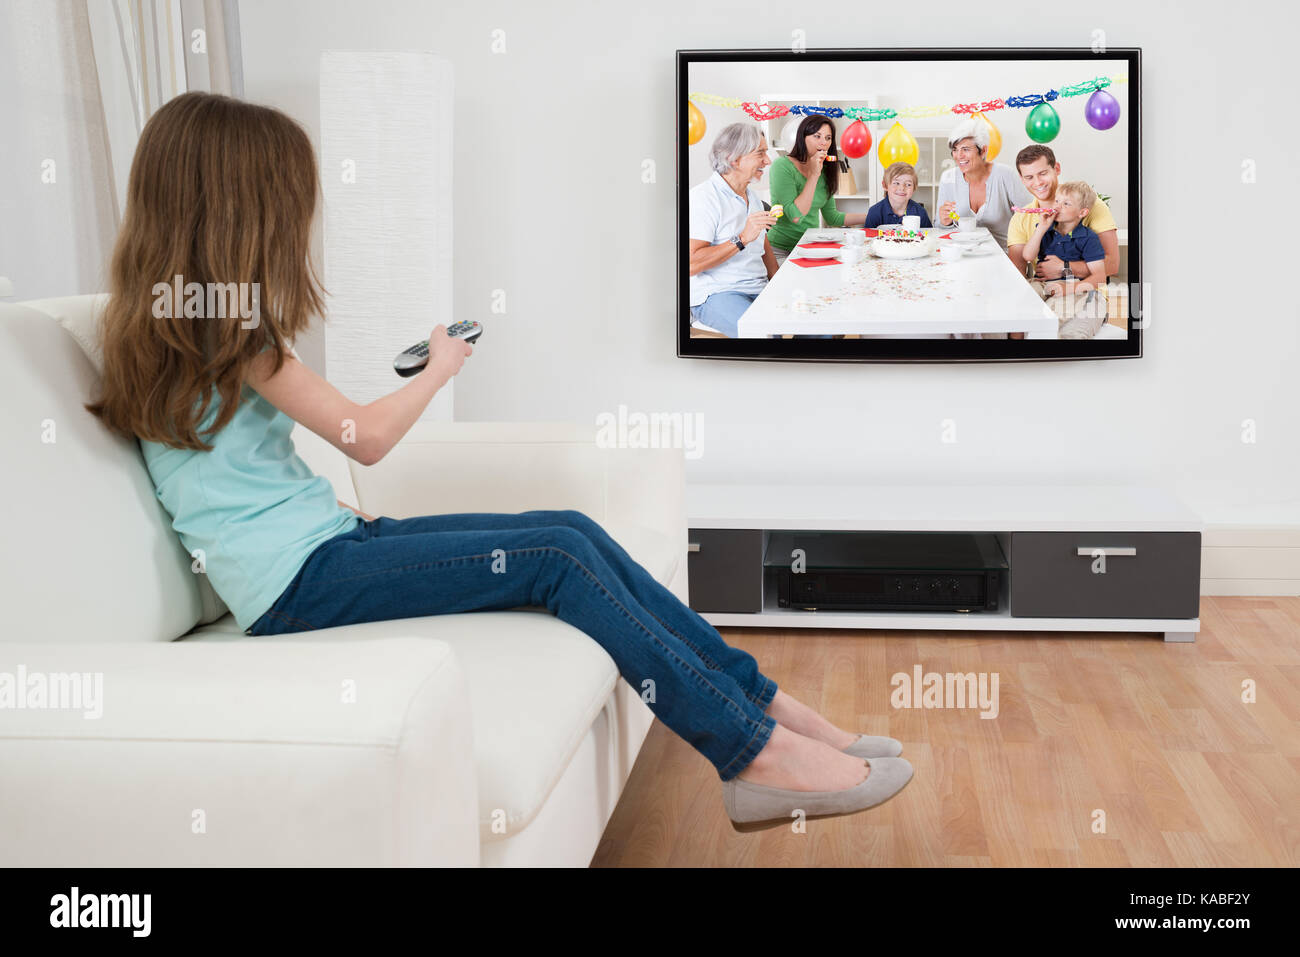 Girl Changing Channel With Remote Control In Front Of Television At Home Stock Photo